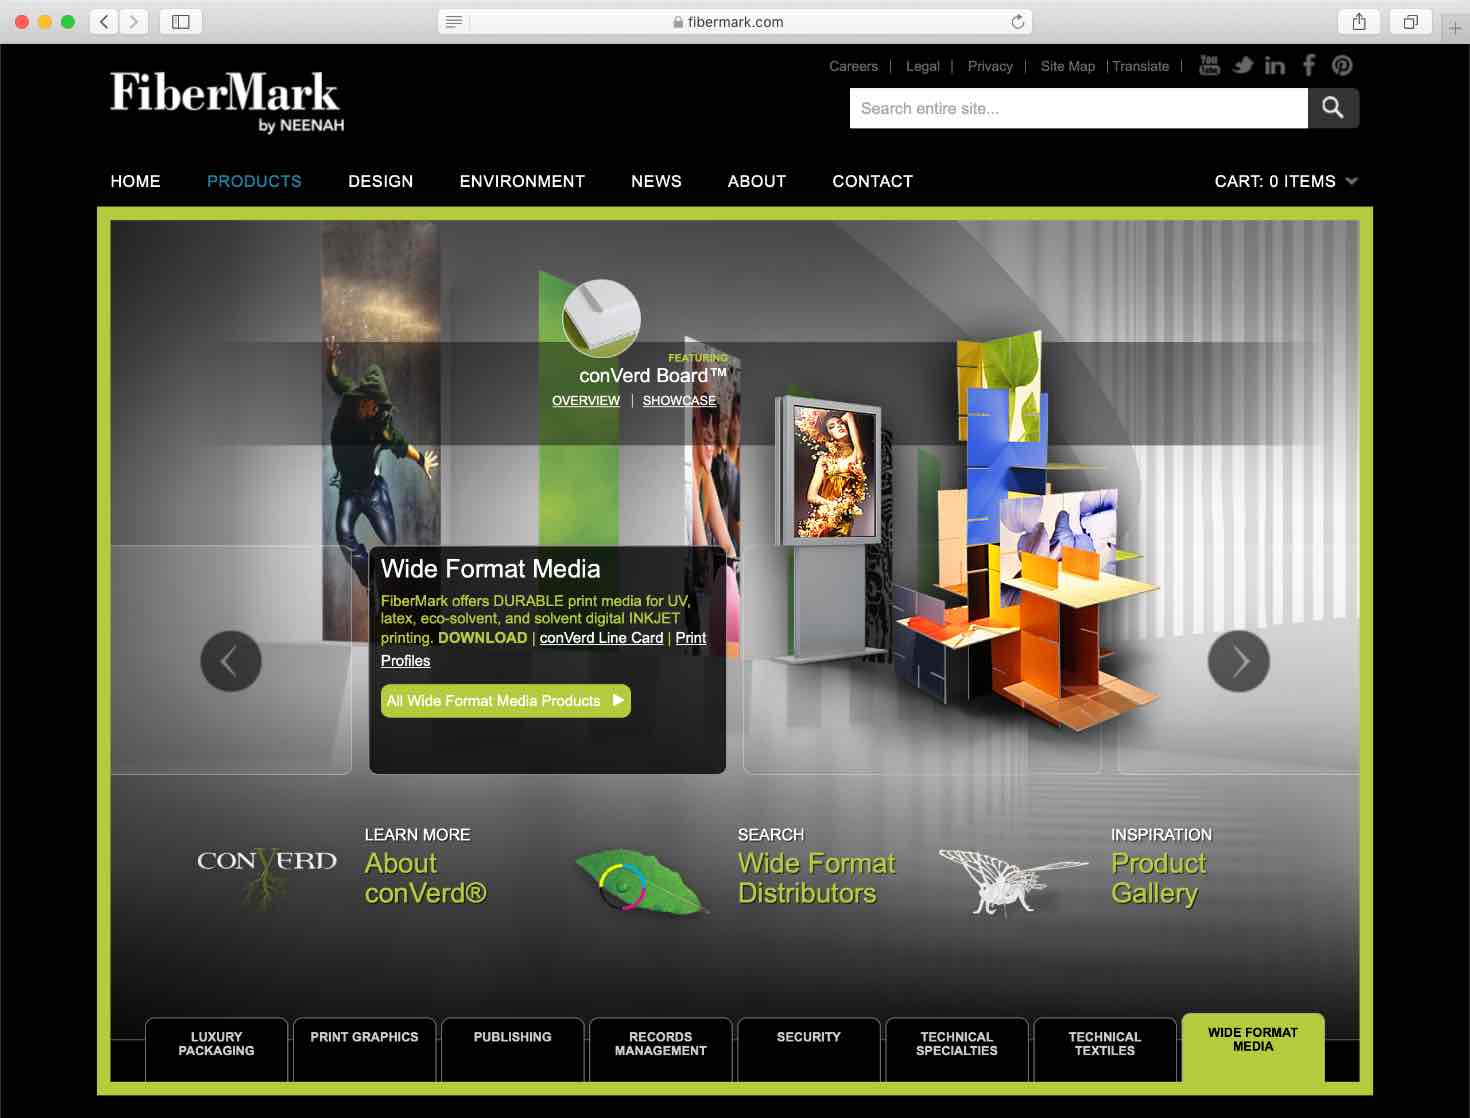 FiberMark Products page